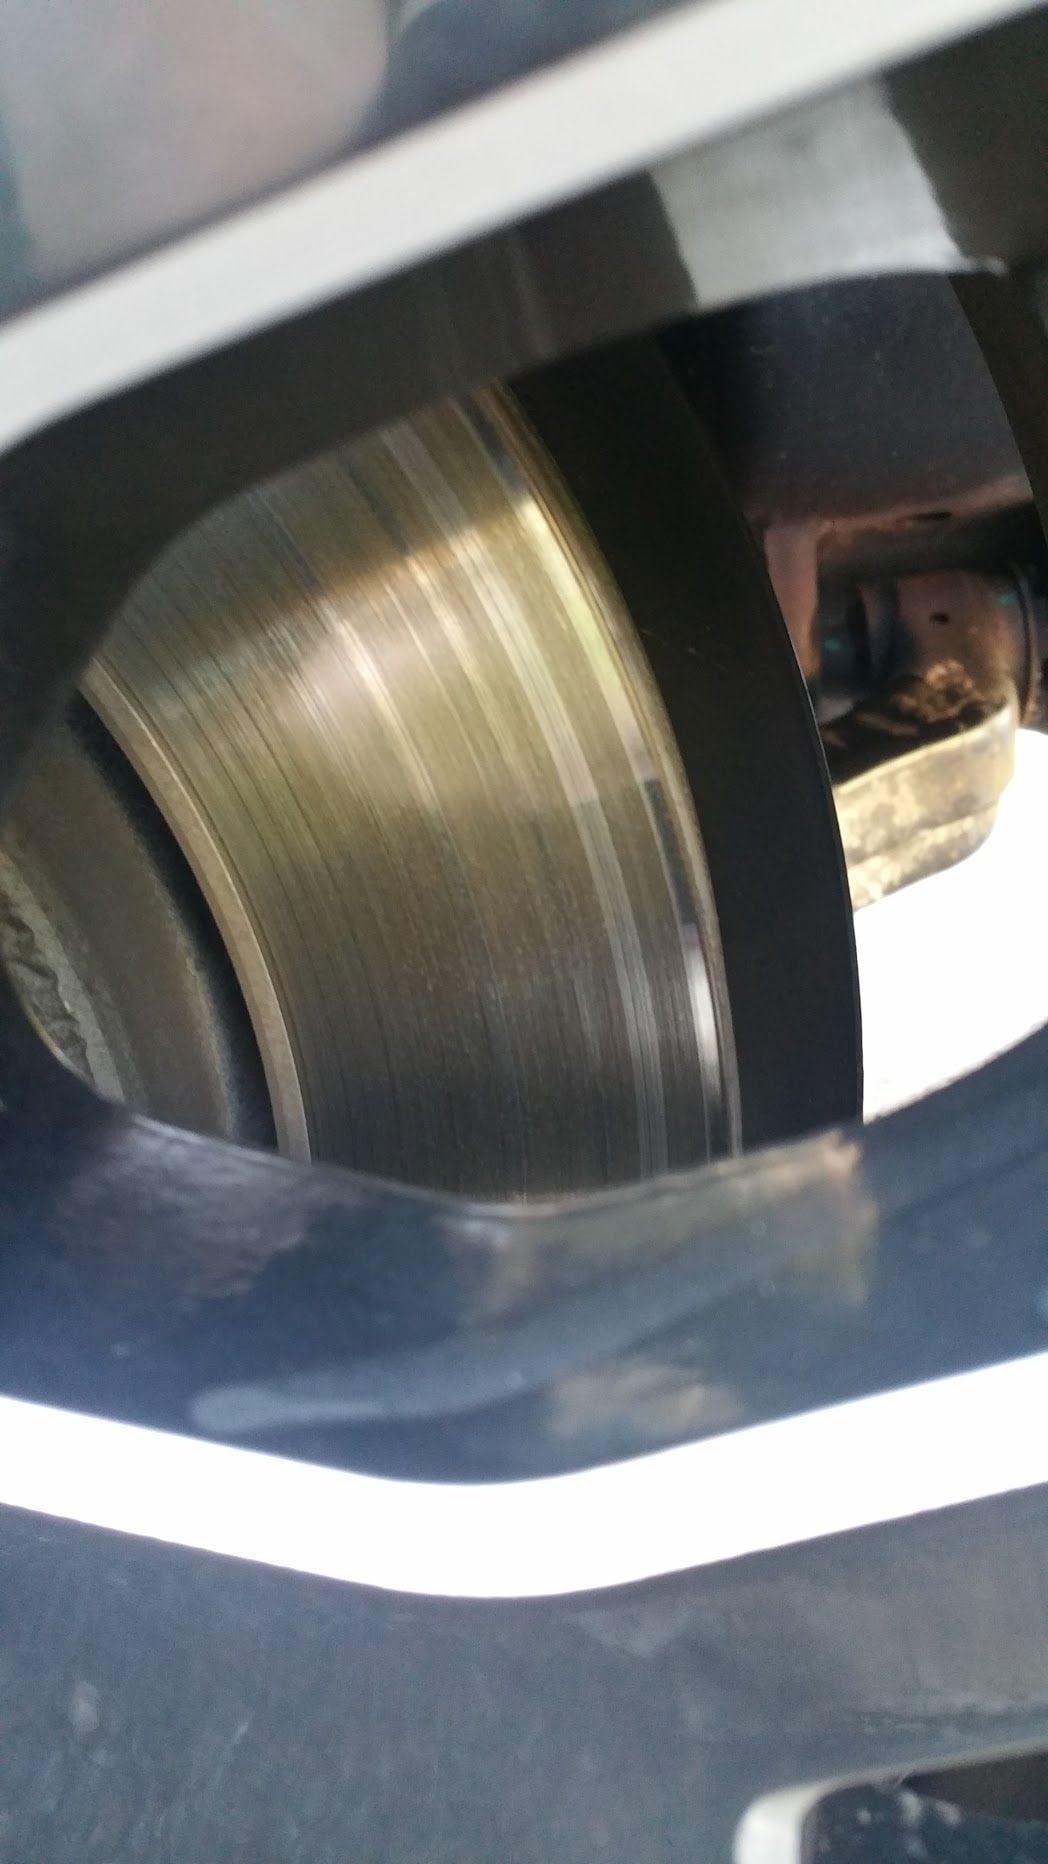 Vibration through gas pedal - Page 15 - Ford F150 Forum - Community of